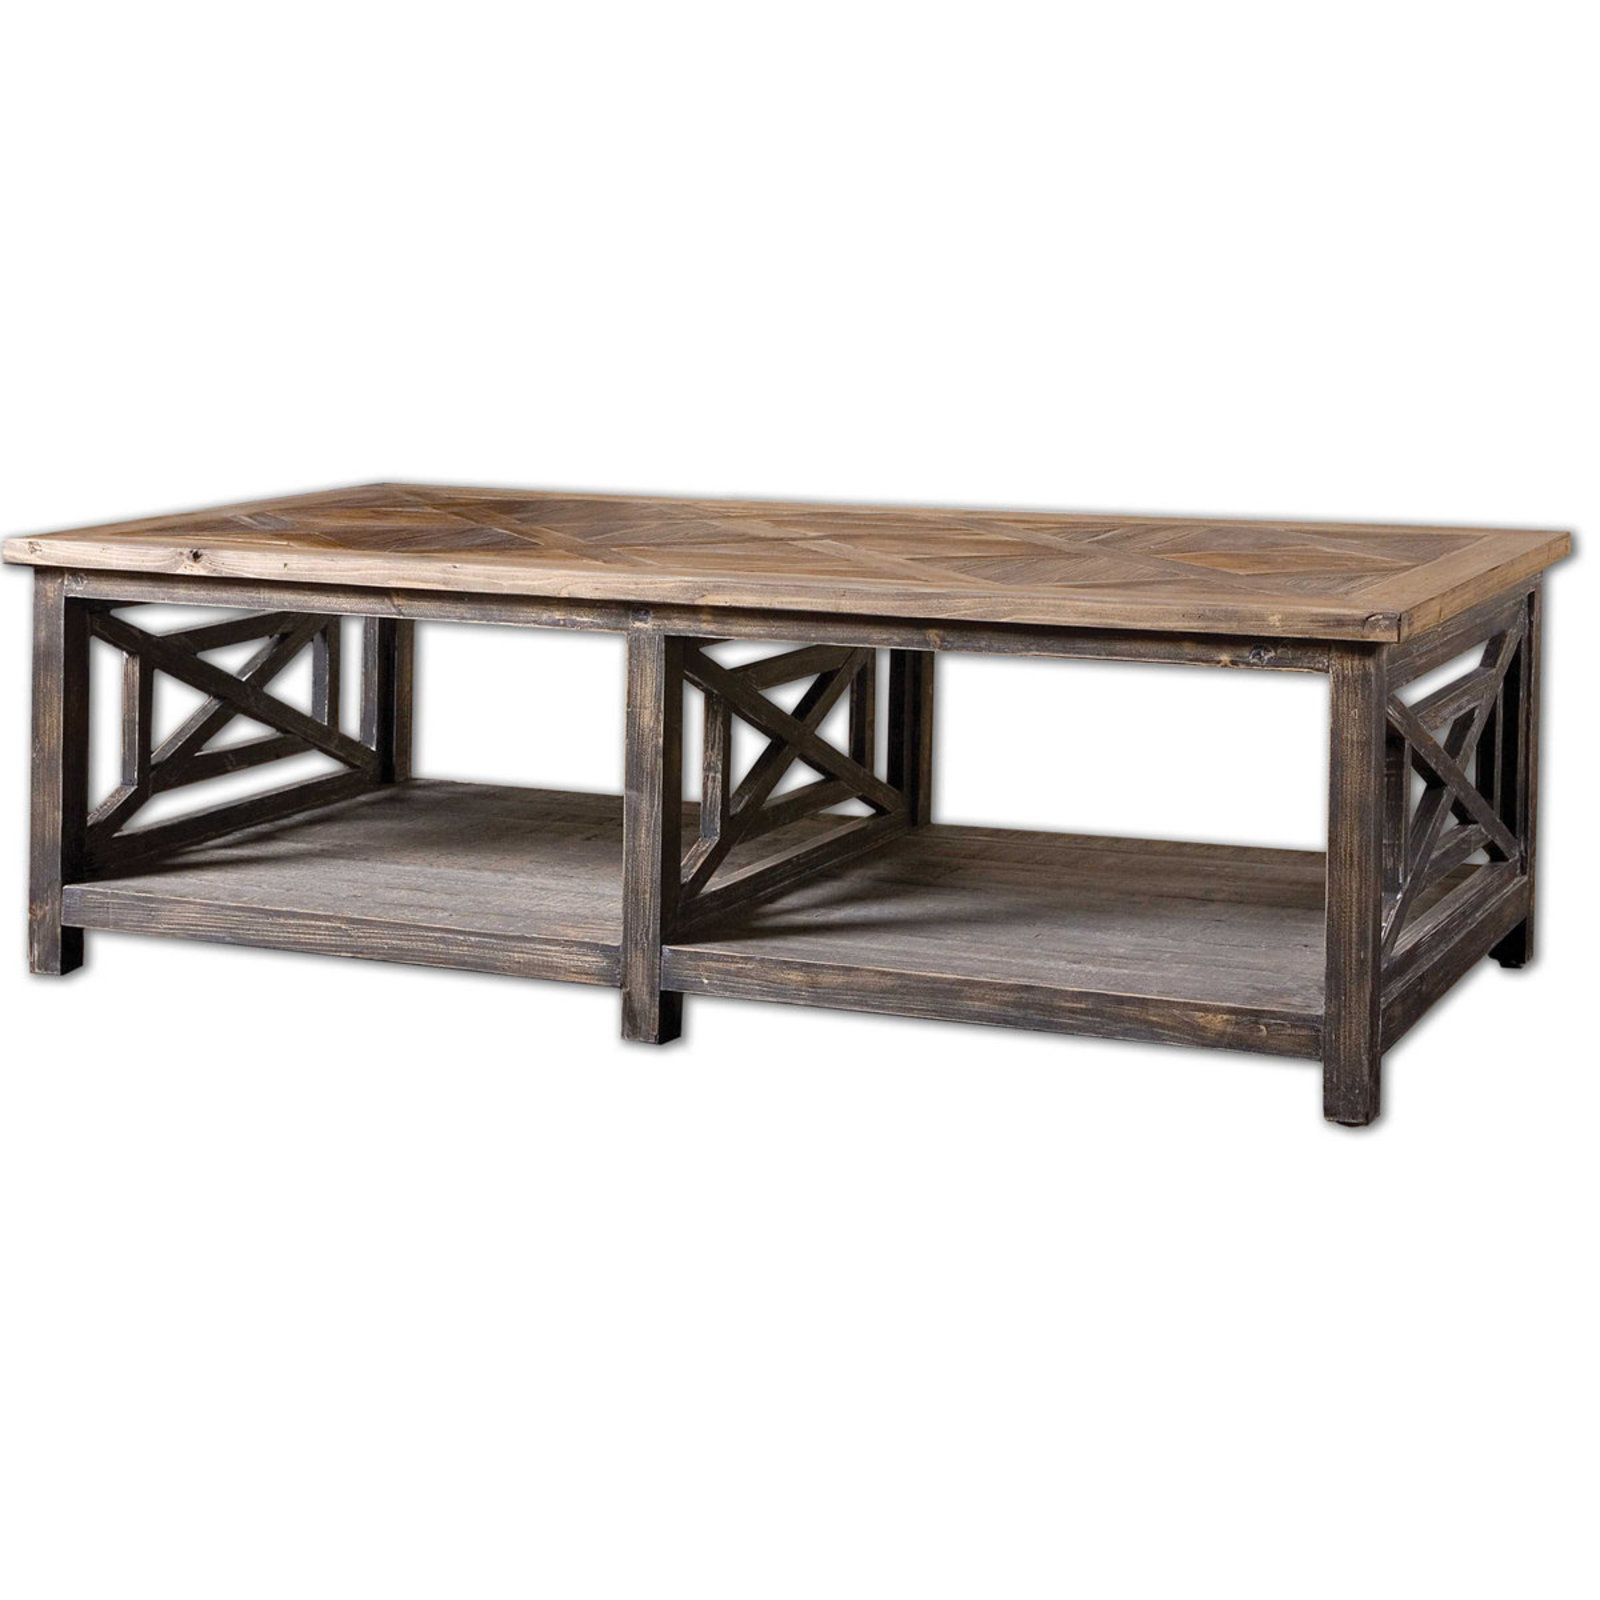 Reclaimed Wood Coffee Table As Well Large With Elm Plus Base Regarding Most Current Reclaimed Elm Iron Coffee Tables (View 11 of 20)